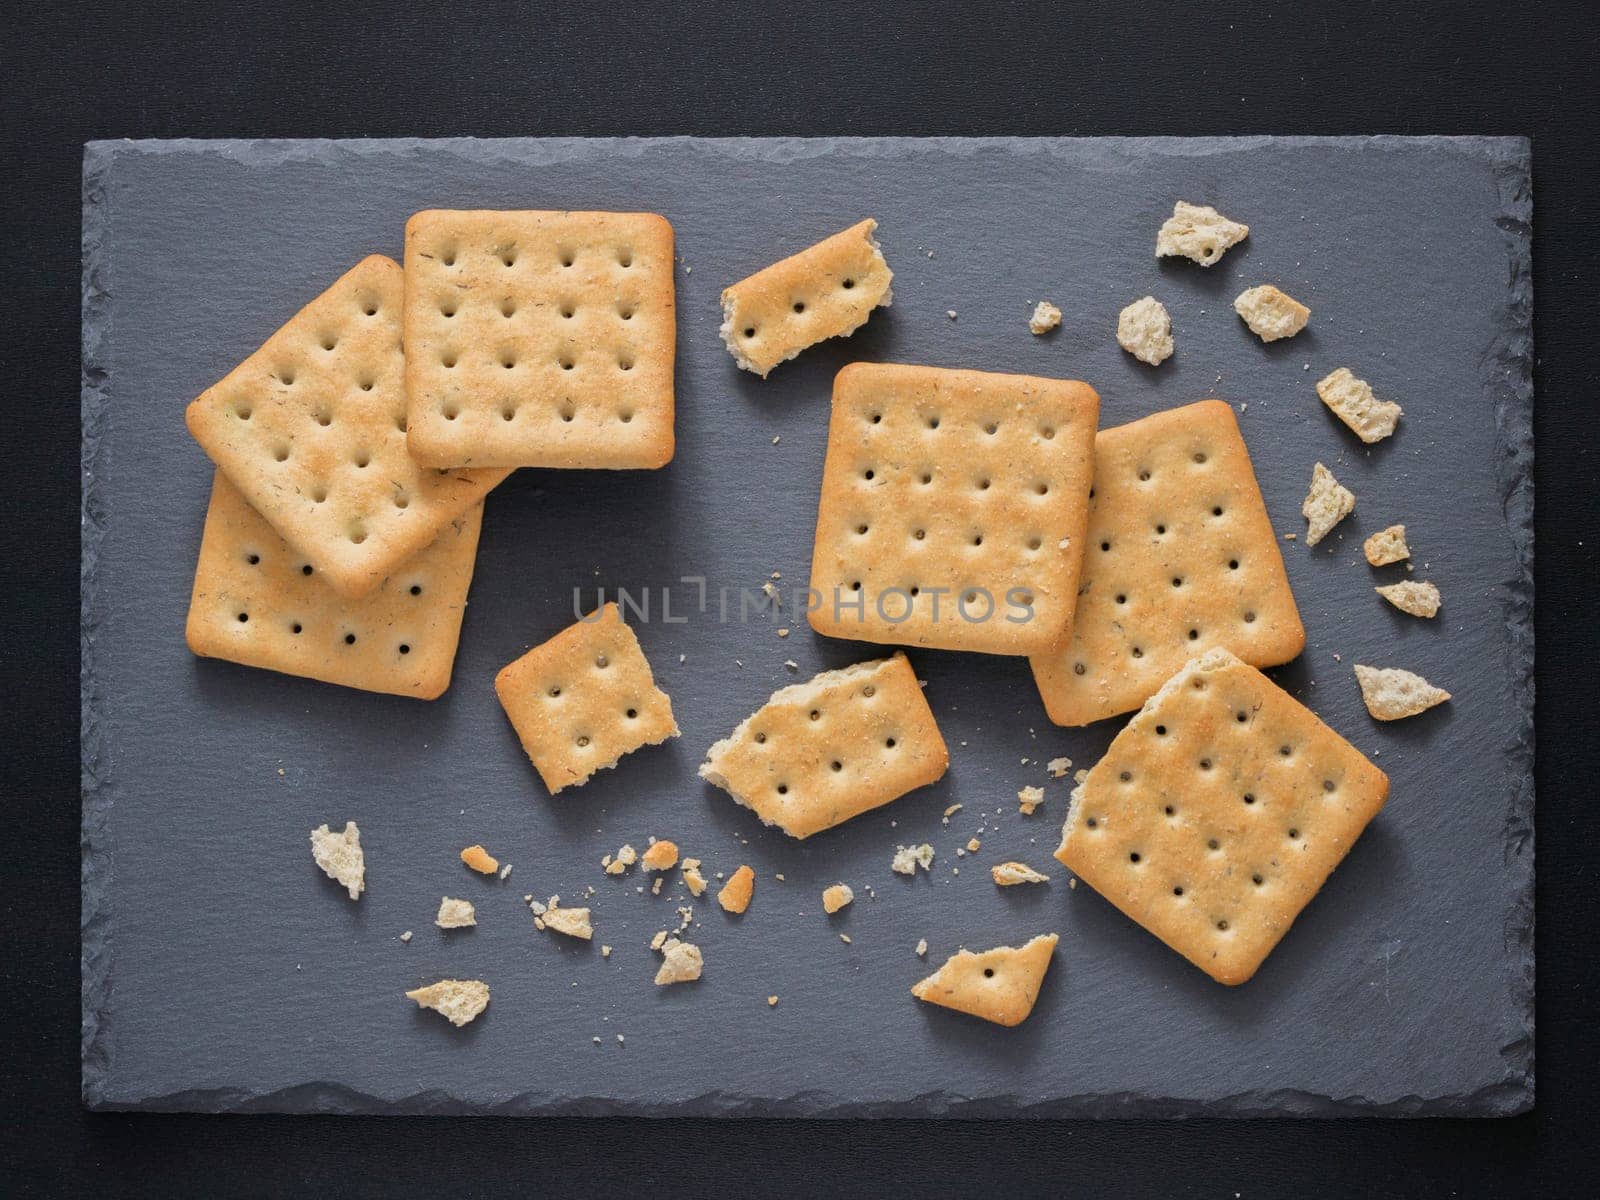 Square crackers with pieces and crumbs on slate gray background. Dry salt cracker cookies with fiber and dry spices. Top view or flat lay.